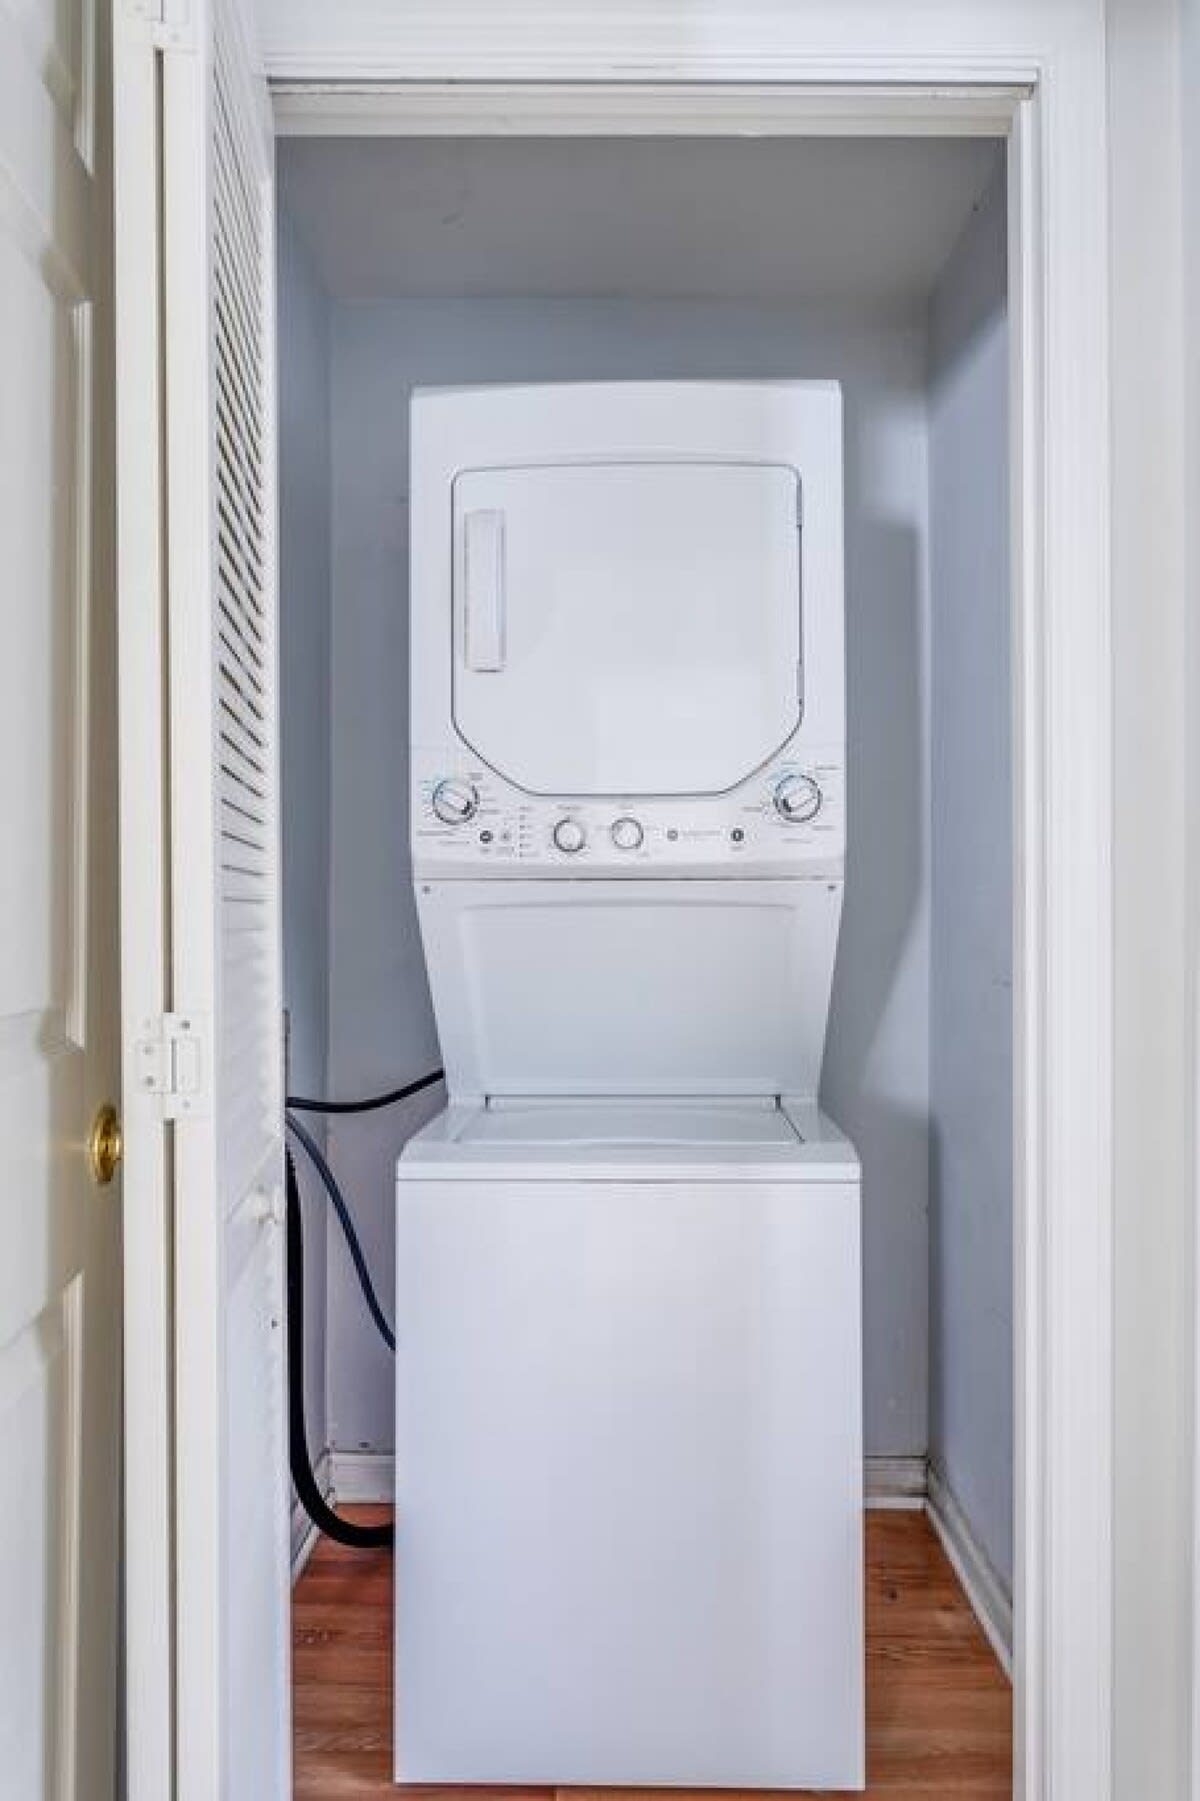 Washer and Dryer within unit!